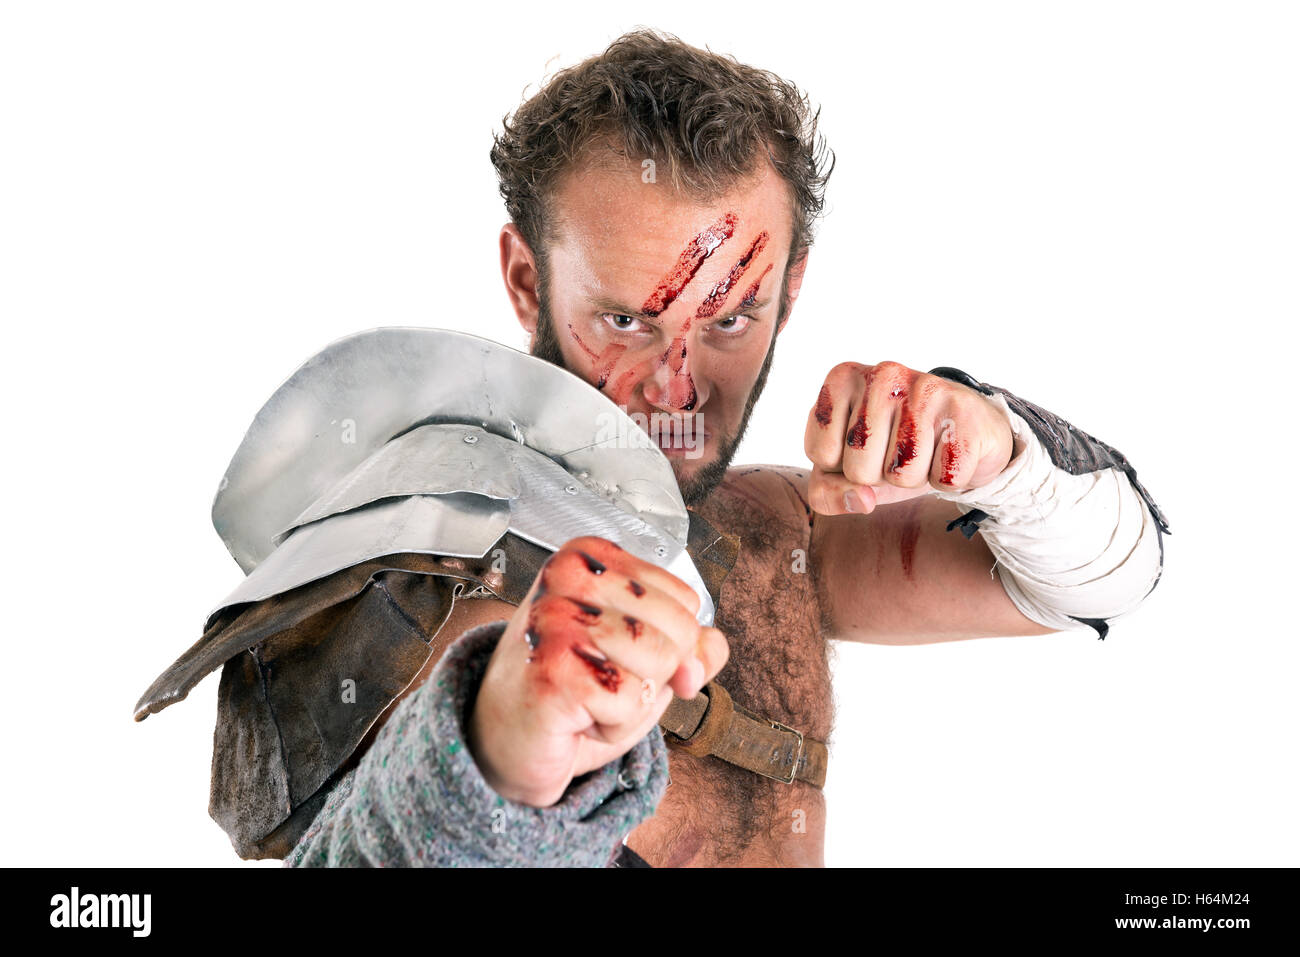 Ancient warrior or Gladiator isolated in a white background Stock Photo